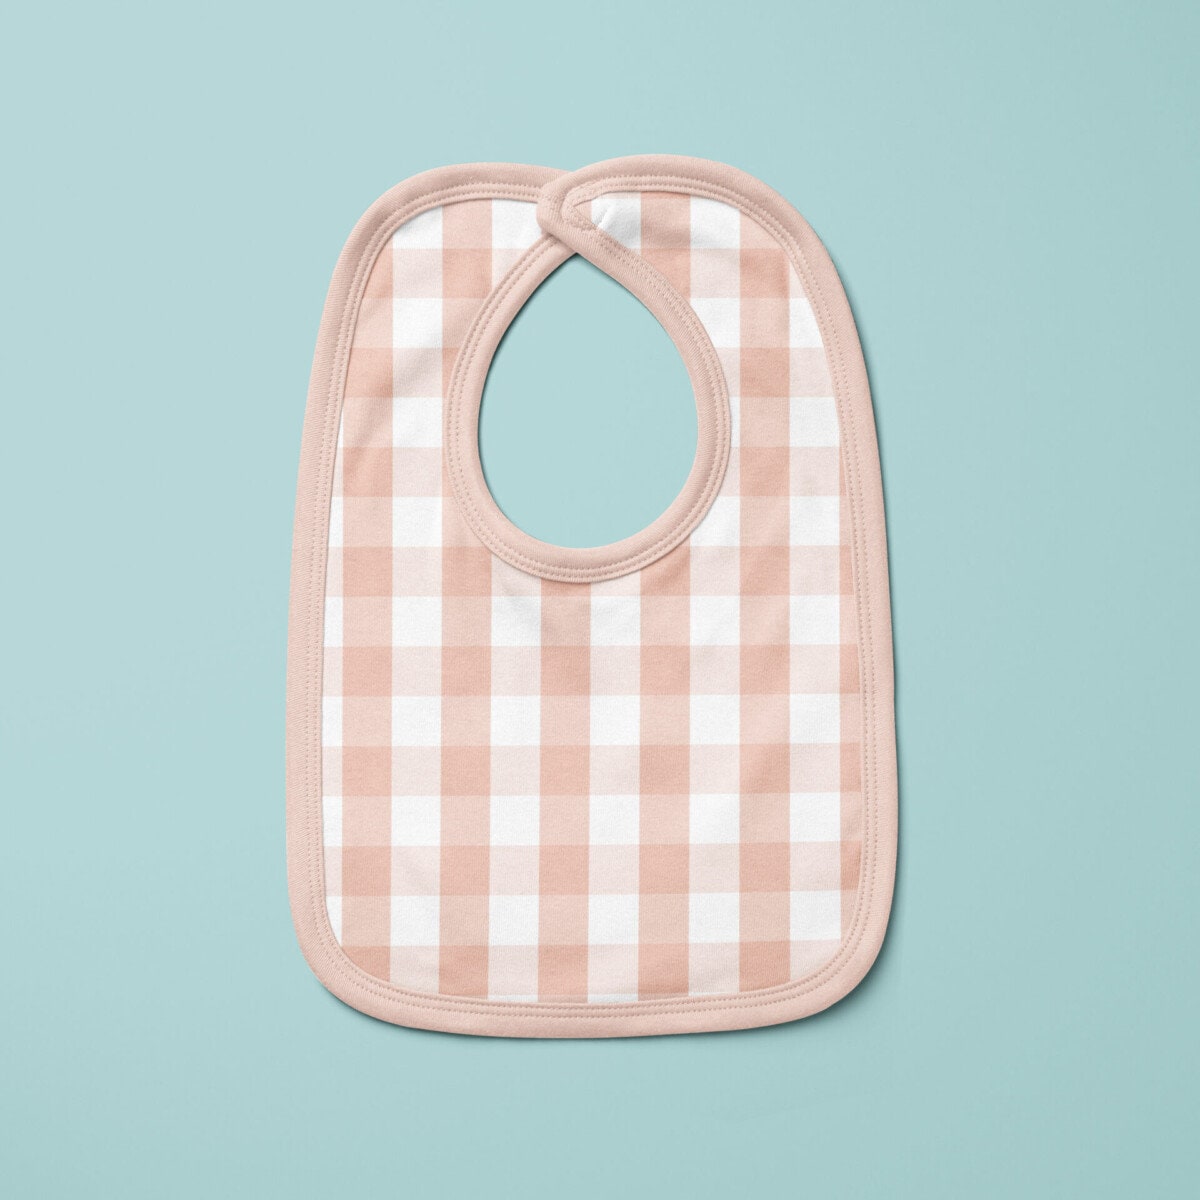 Gingham and Dots and Stitch XVII,